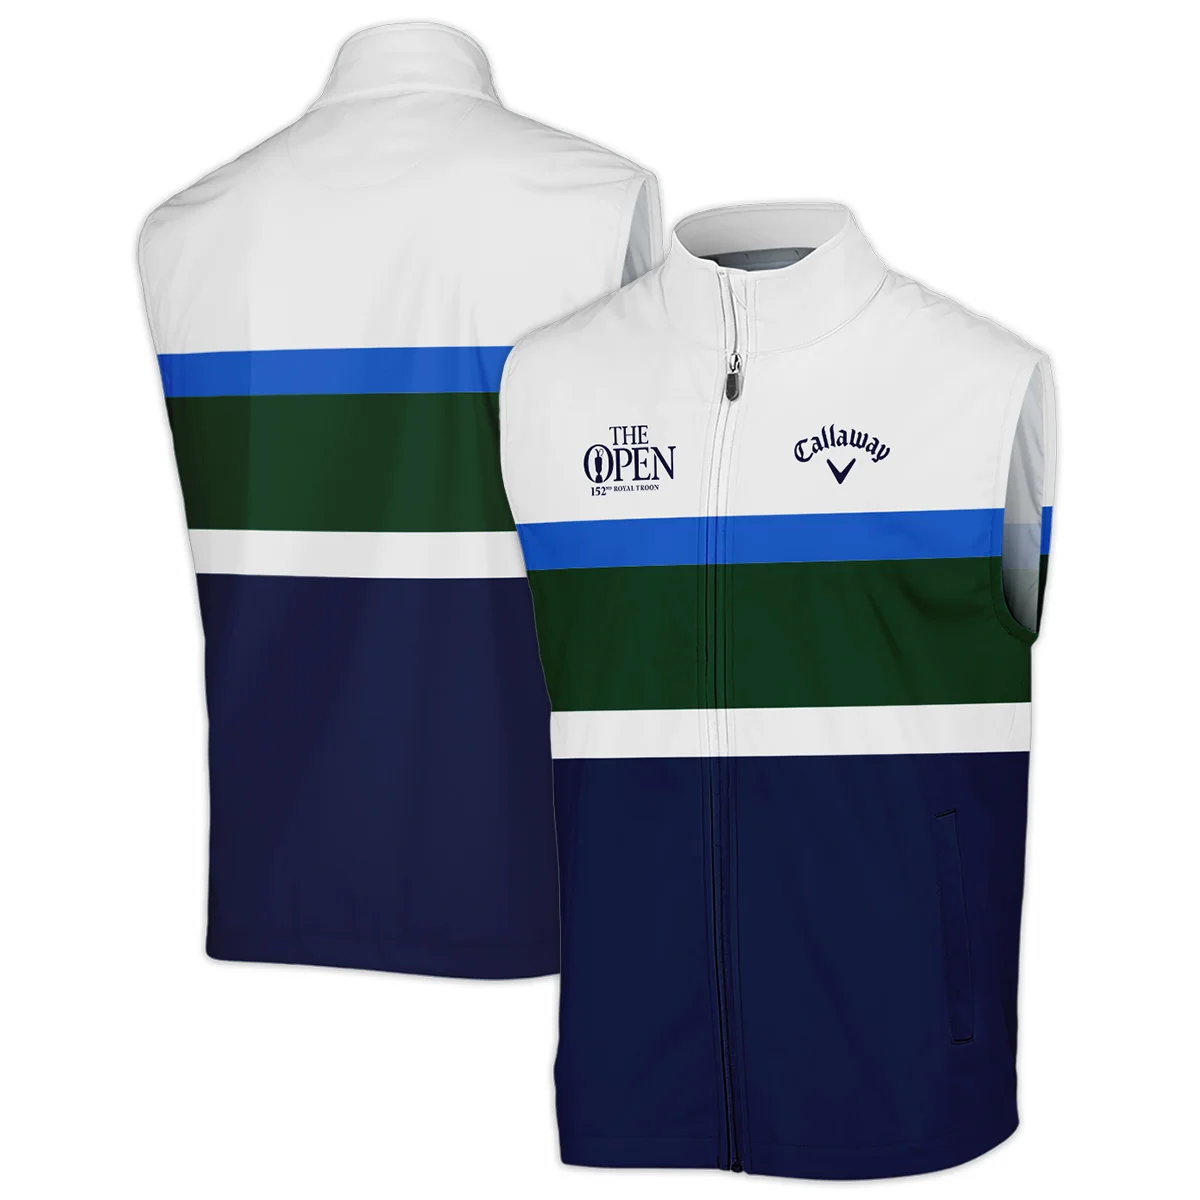 White Blue Green Background Callaway 152nd Open Championship Performance Quarter Zip Sweatshirt With Pockets All Over Prints HOTOP270624A01CLWTS